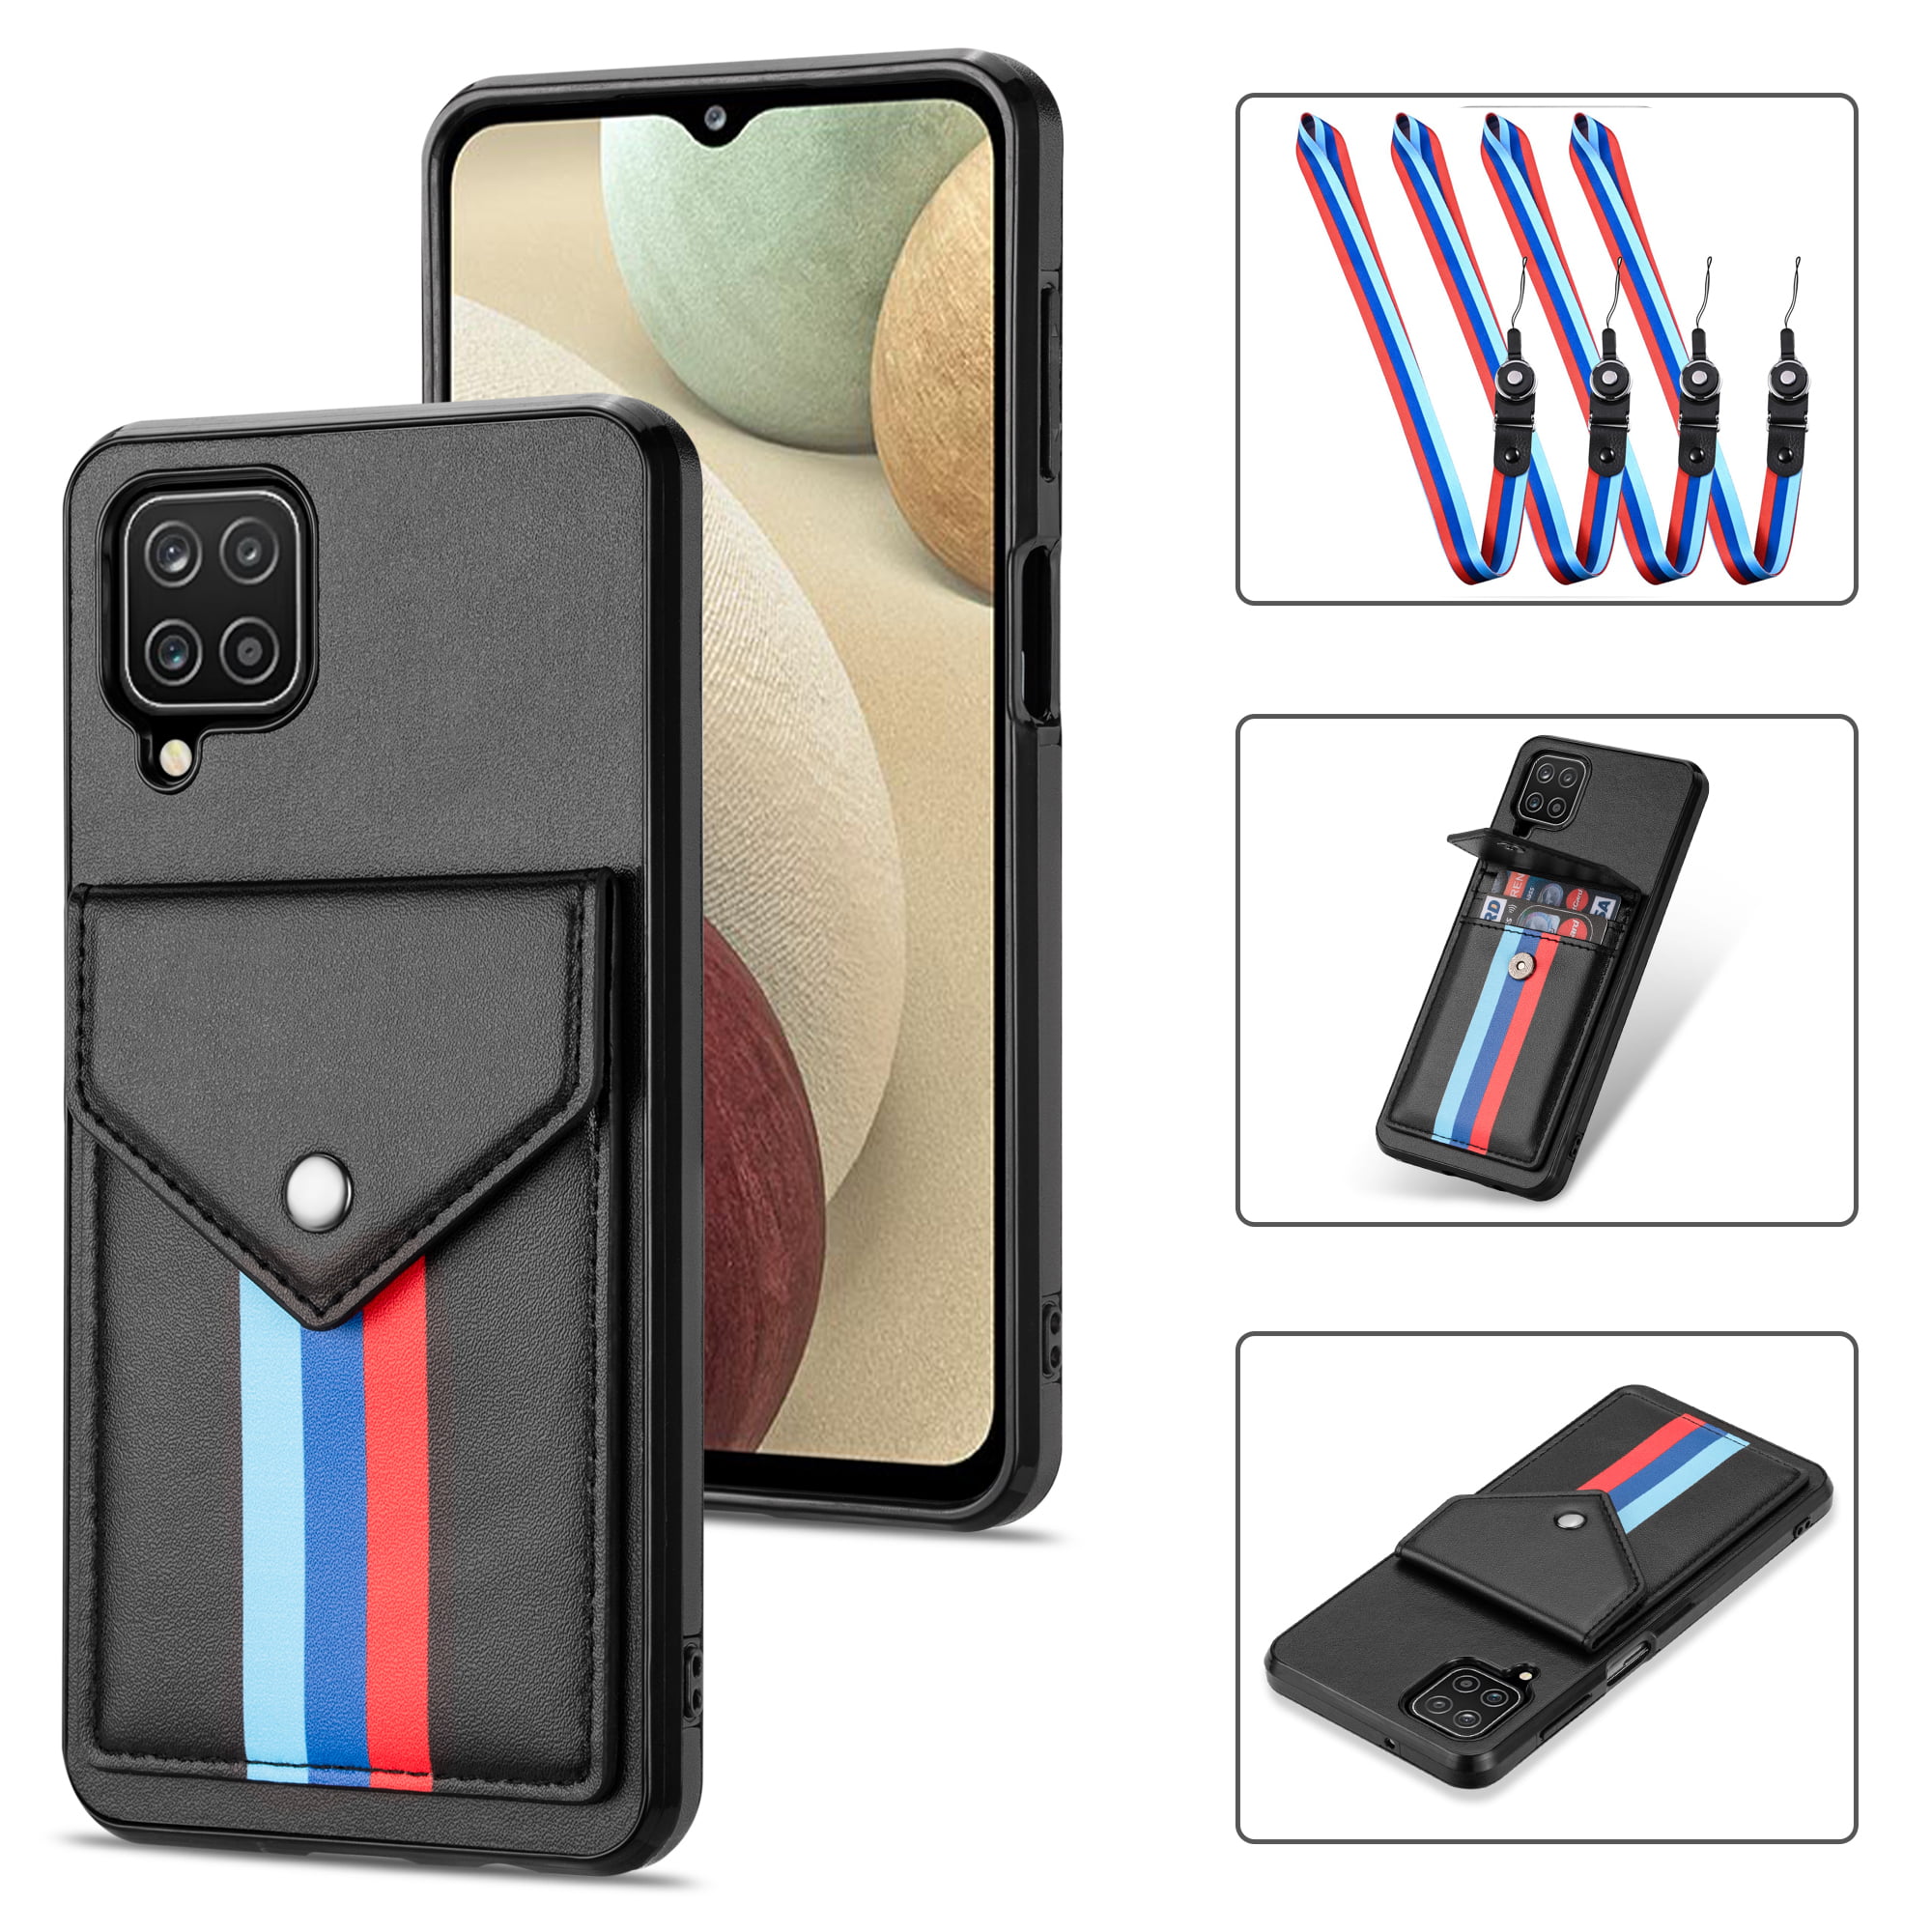 Black,6.5inch PU Leather Wallet Case with Credit Card Holder Wrist Strap Shockproof Protective Cover for Samsung A12 4G Phone Double-N Samsung Galaxy A12 Case 